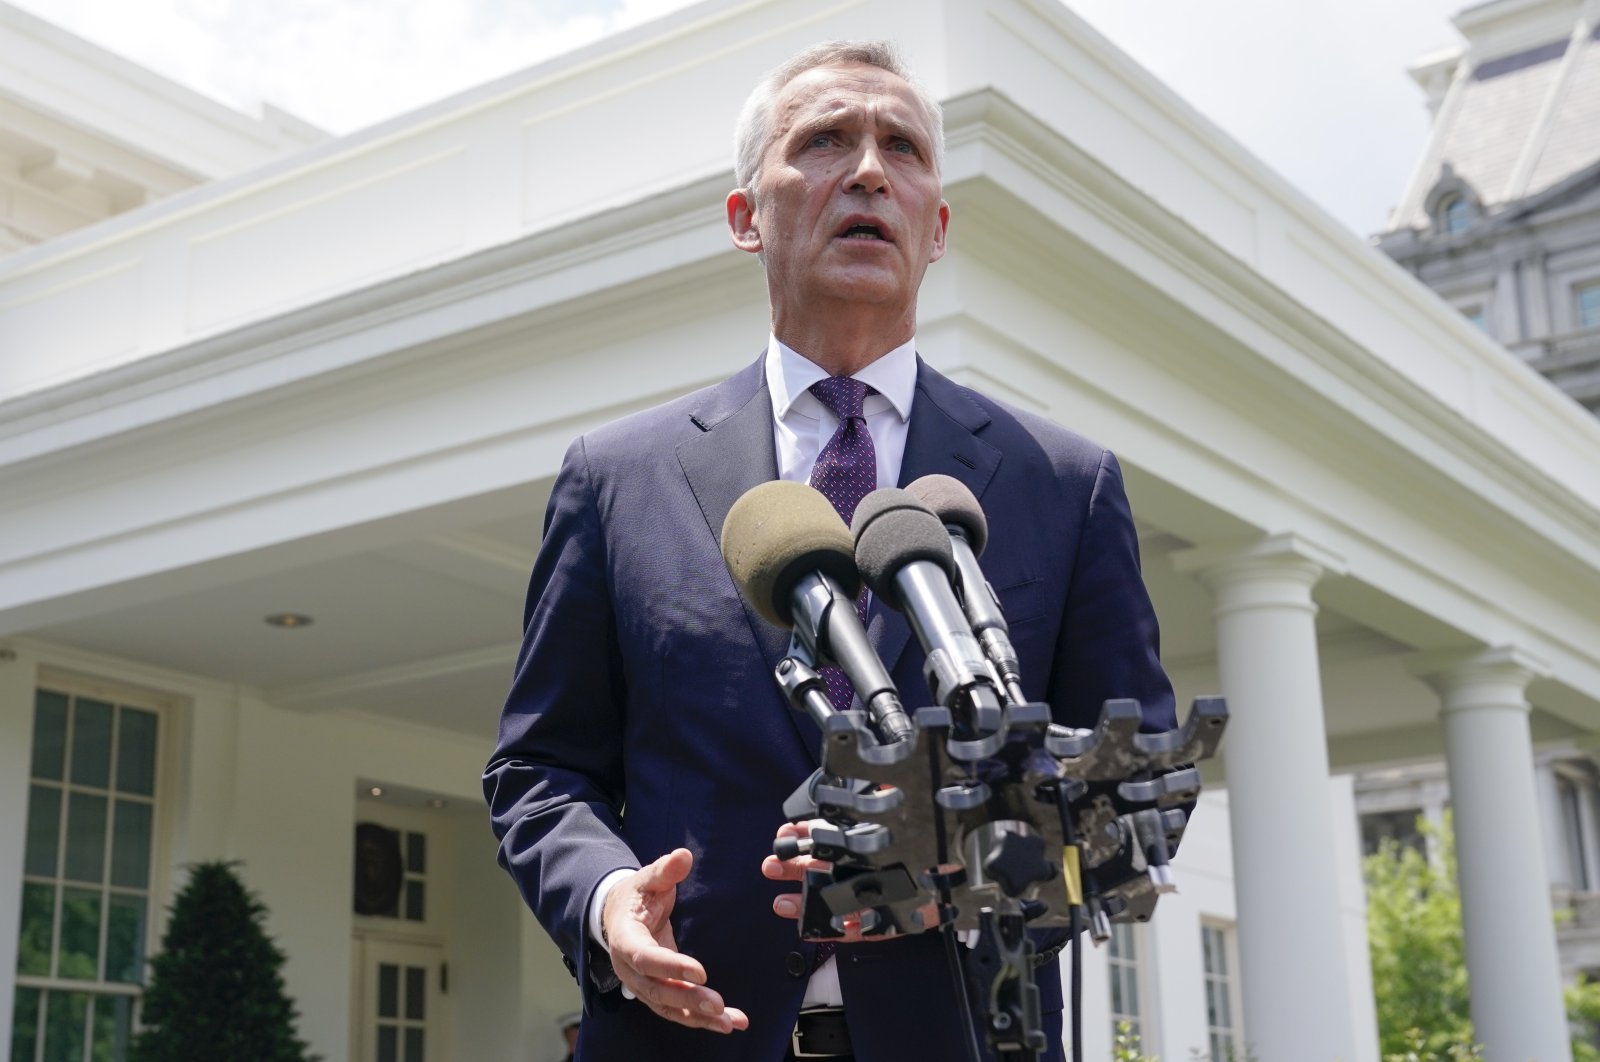 NATO Secretary-General Jens Stoltenberg talks to reporters outside the White House after meeting with President Joe Biden, Thursday, June 2, 2022, in Washington. (AP Photo/Evan Vucci)